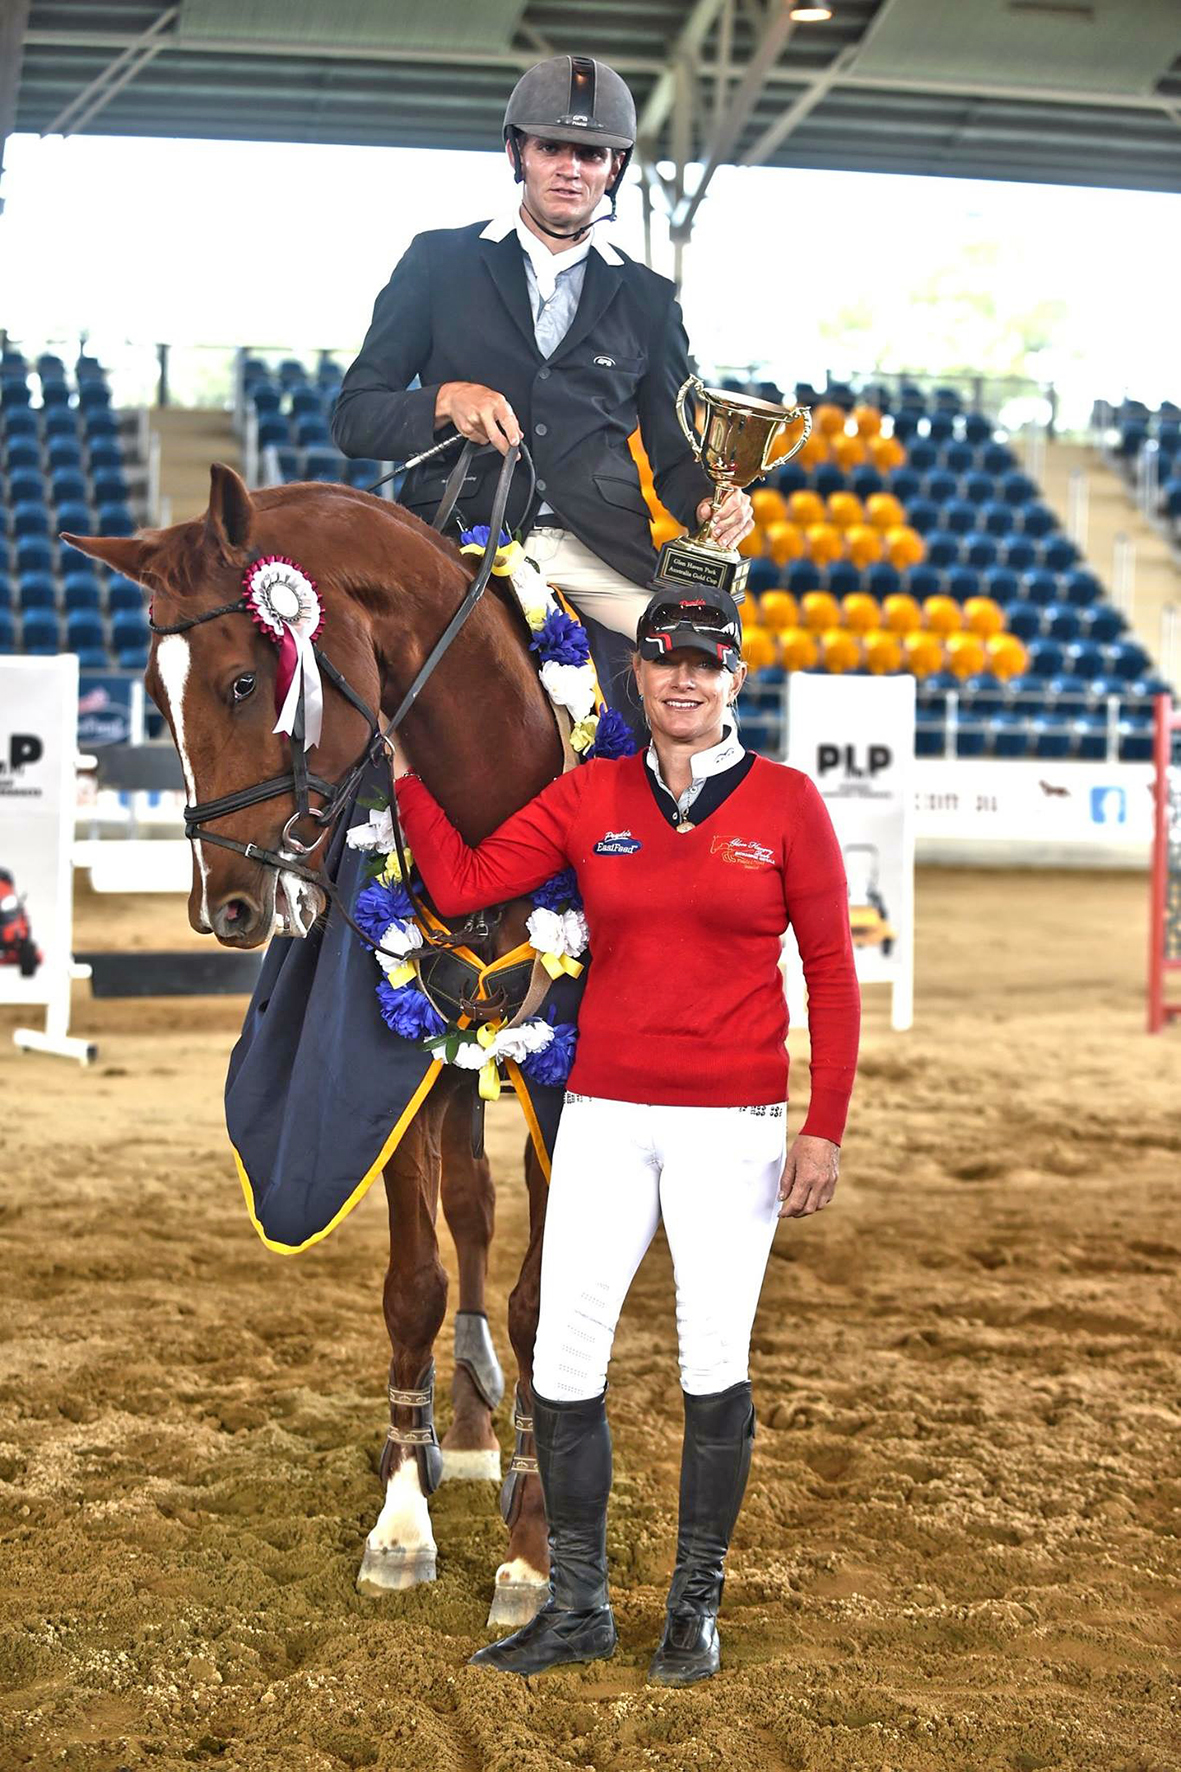 Couple at showjumping event with trophy.